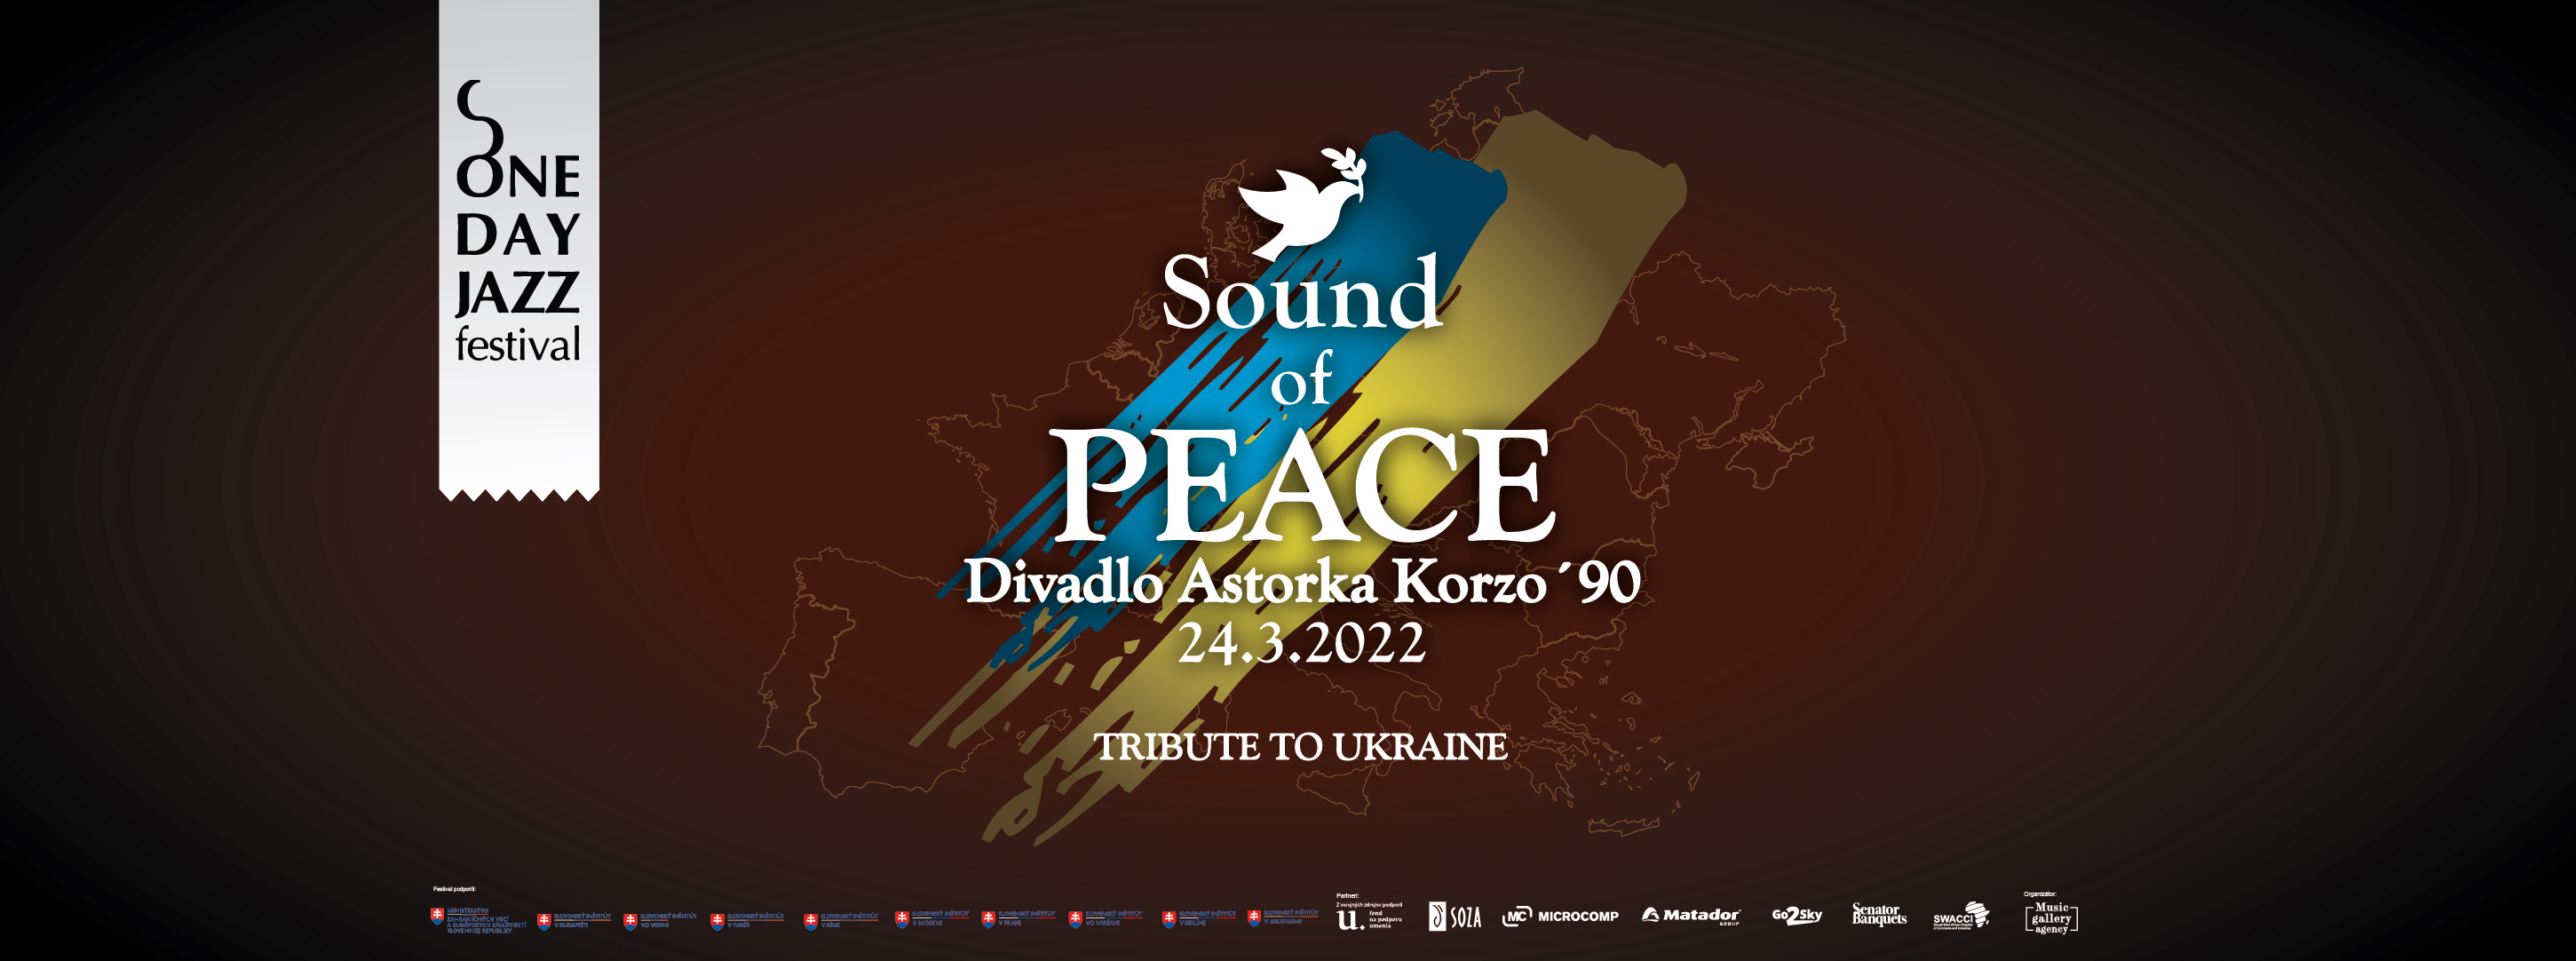 banner sound of peace 1920x1080 2022